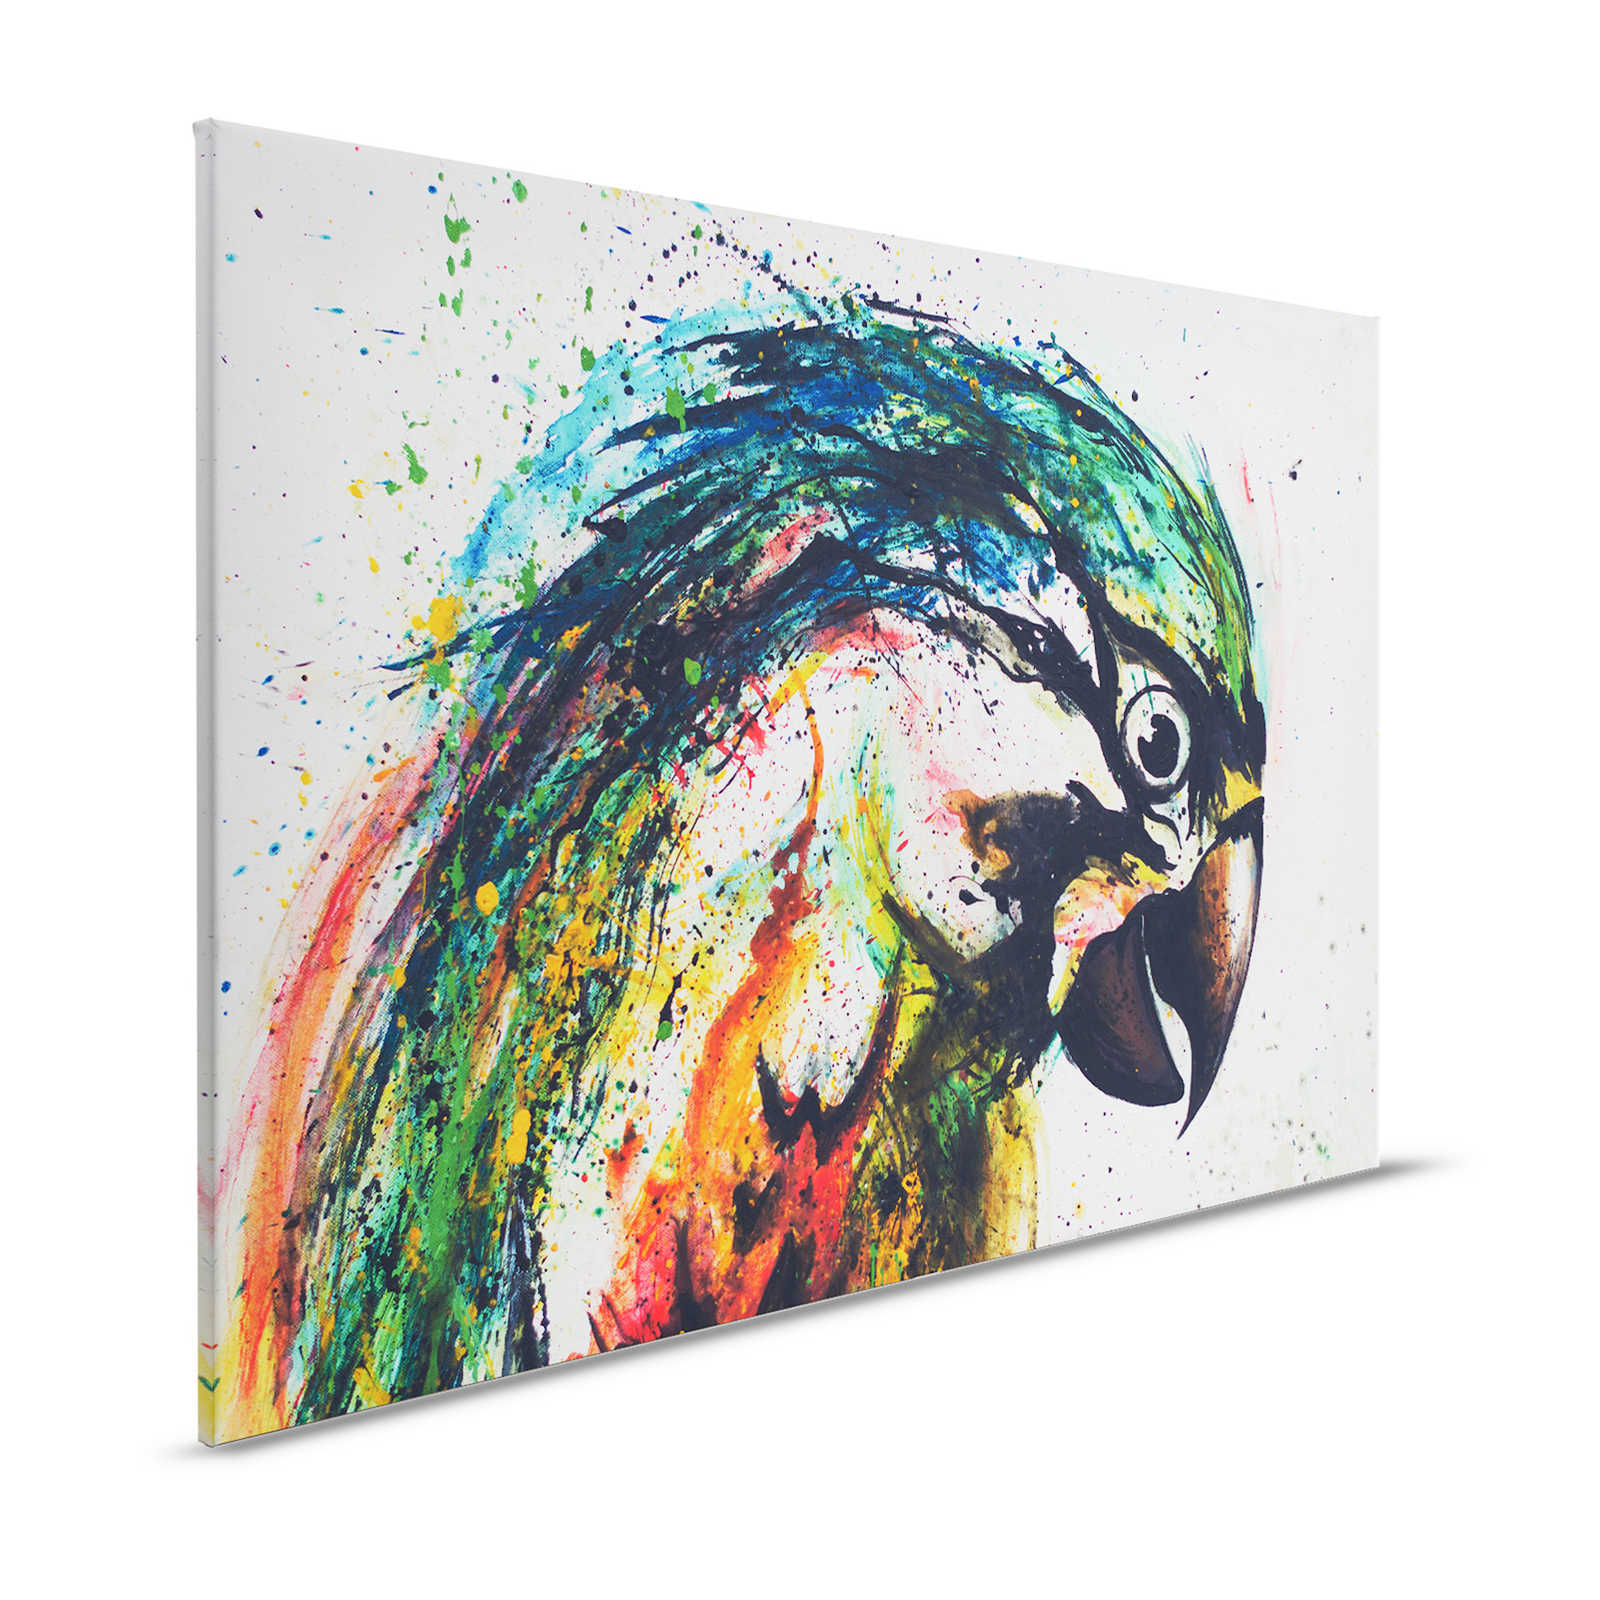 Canvas painting Parrot in colourful drawing style - 1,20 m x 0,80 m
